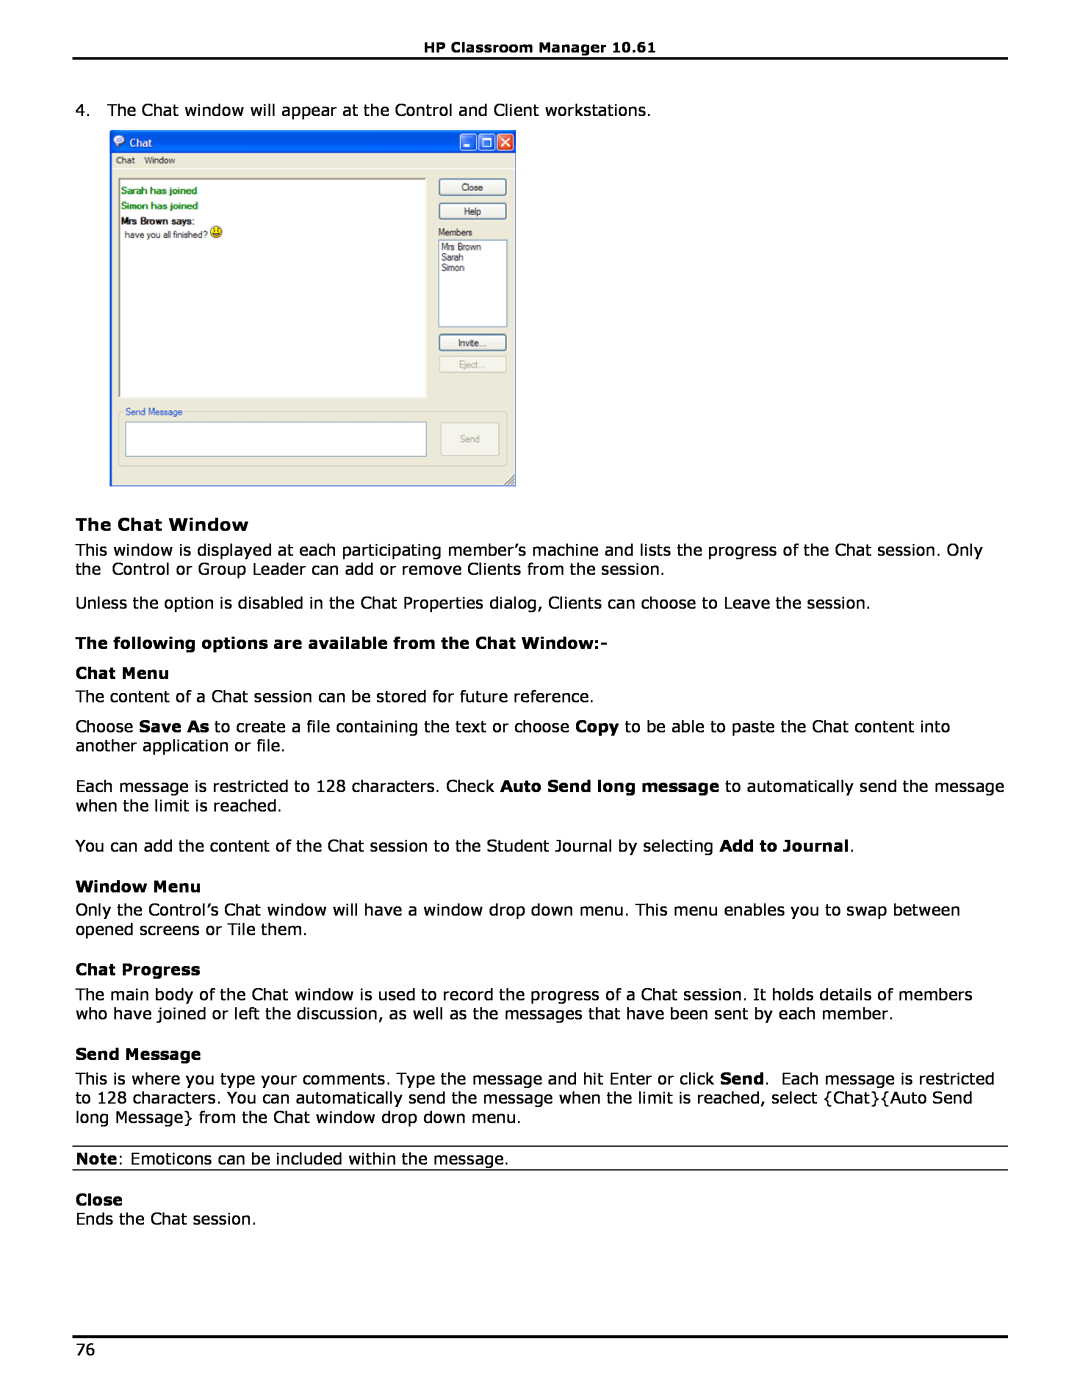 HP Classroom Manager The Chat Window, The following options are available from the Chat Window Chat Menu, Window Menu 